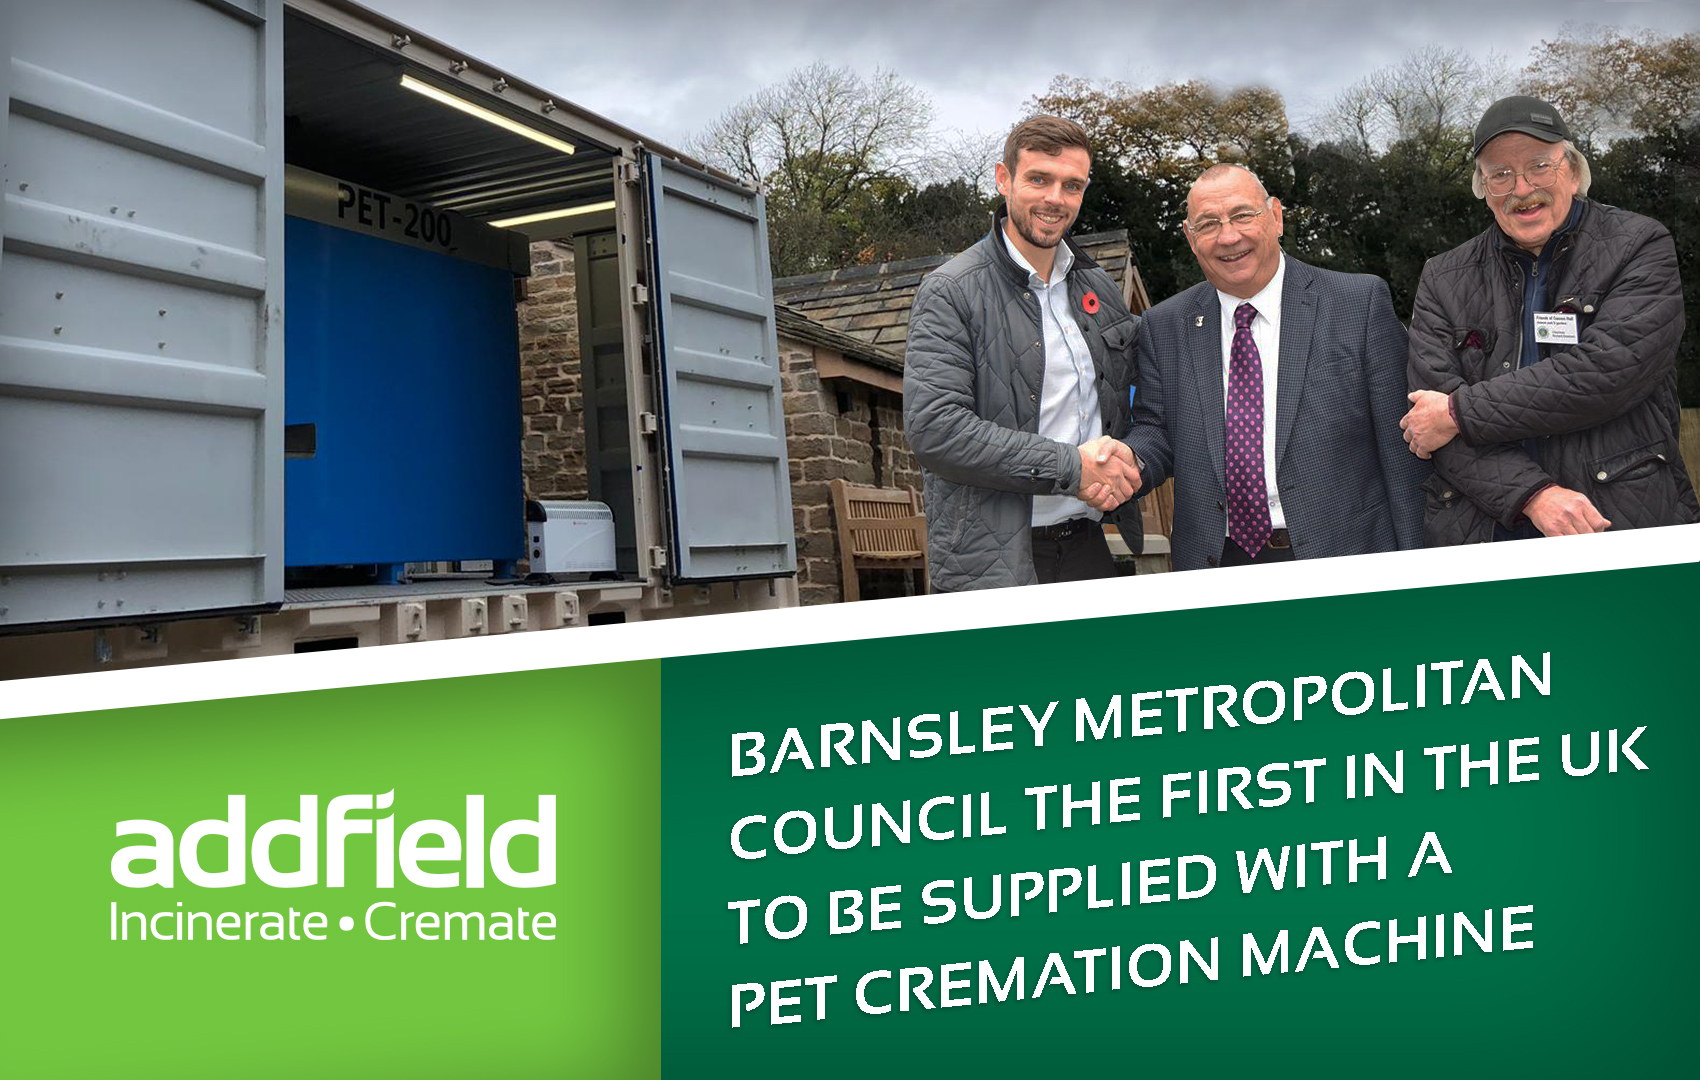 The first Council ran pet crematorium opens with Addfield